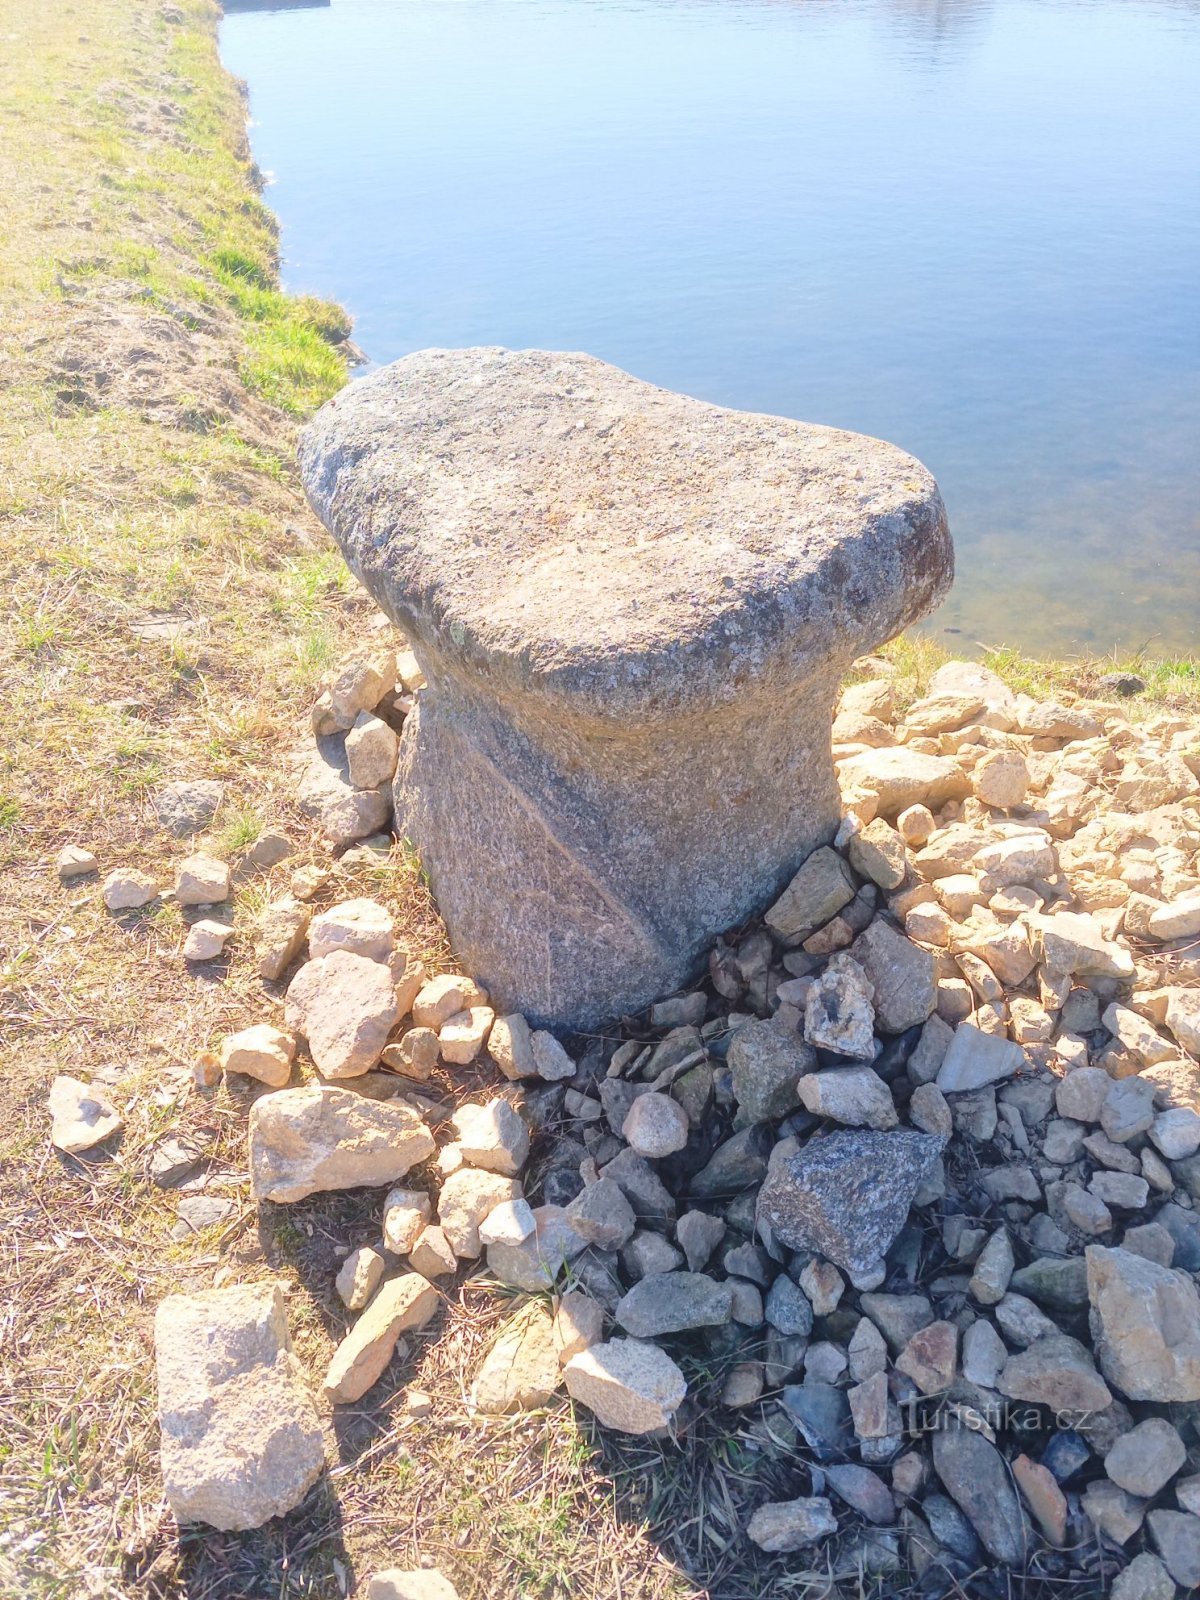 1. Stone table near Nový Dvorů fished in 1991 from the local pond, ND1